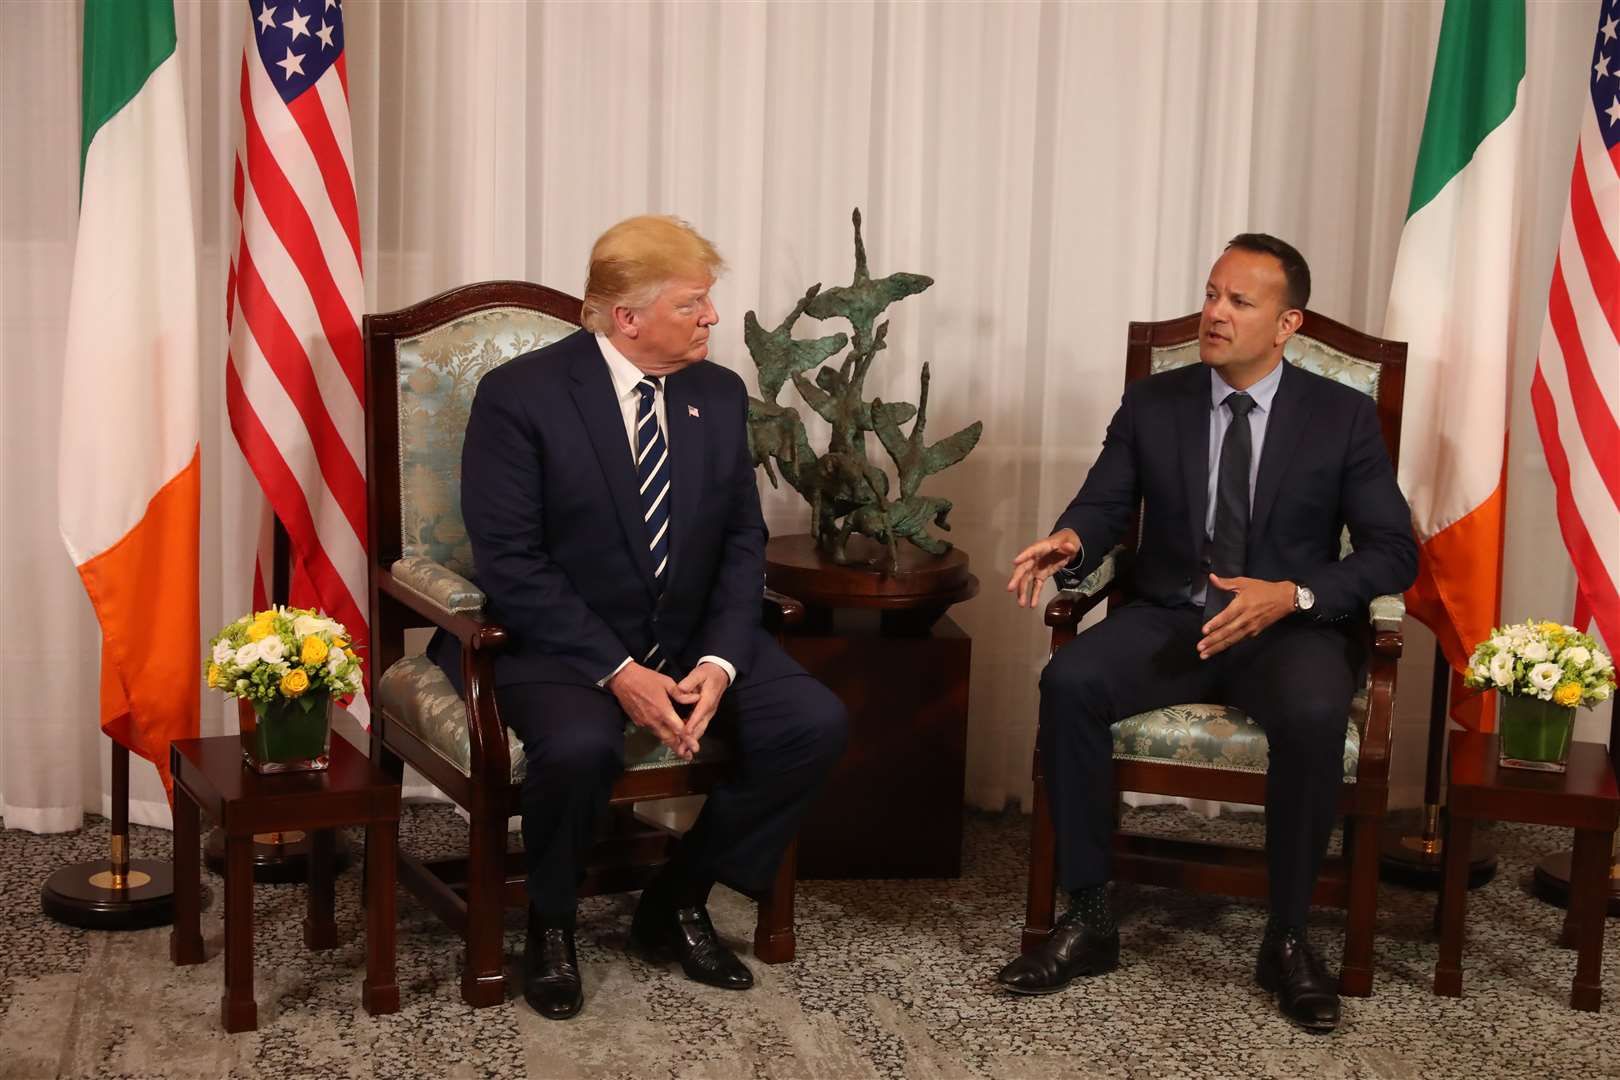 Donald Trump and Taoiseach Leo Varadkar hold a bilateral meeting at Shannon Airport in June 2019 (Liam McBurney/PA)